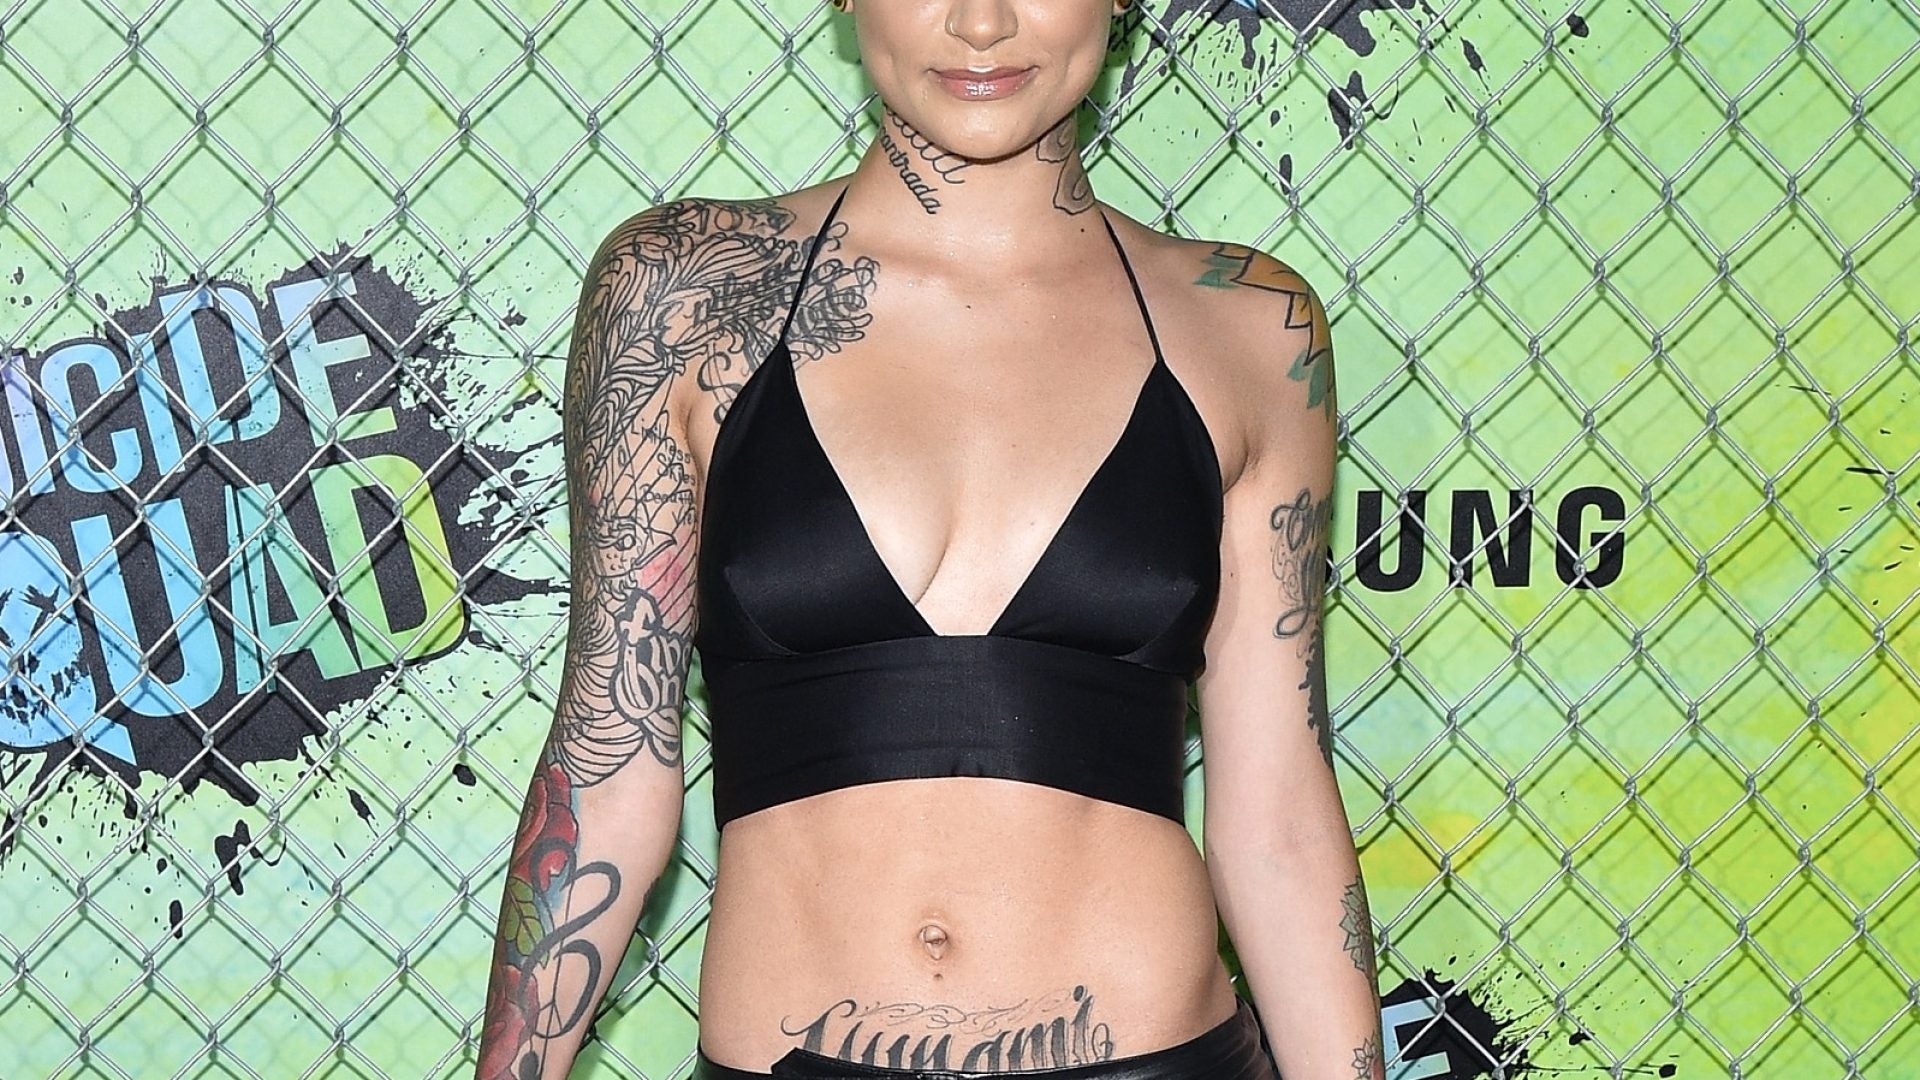 5 Easy Fitness Exercises To Get Kehlani’s Snatched Abs